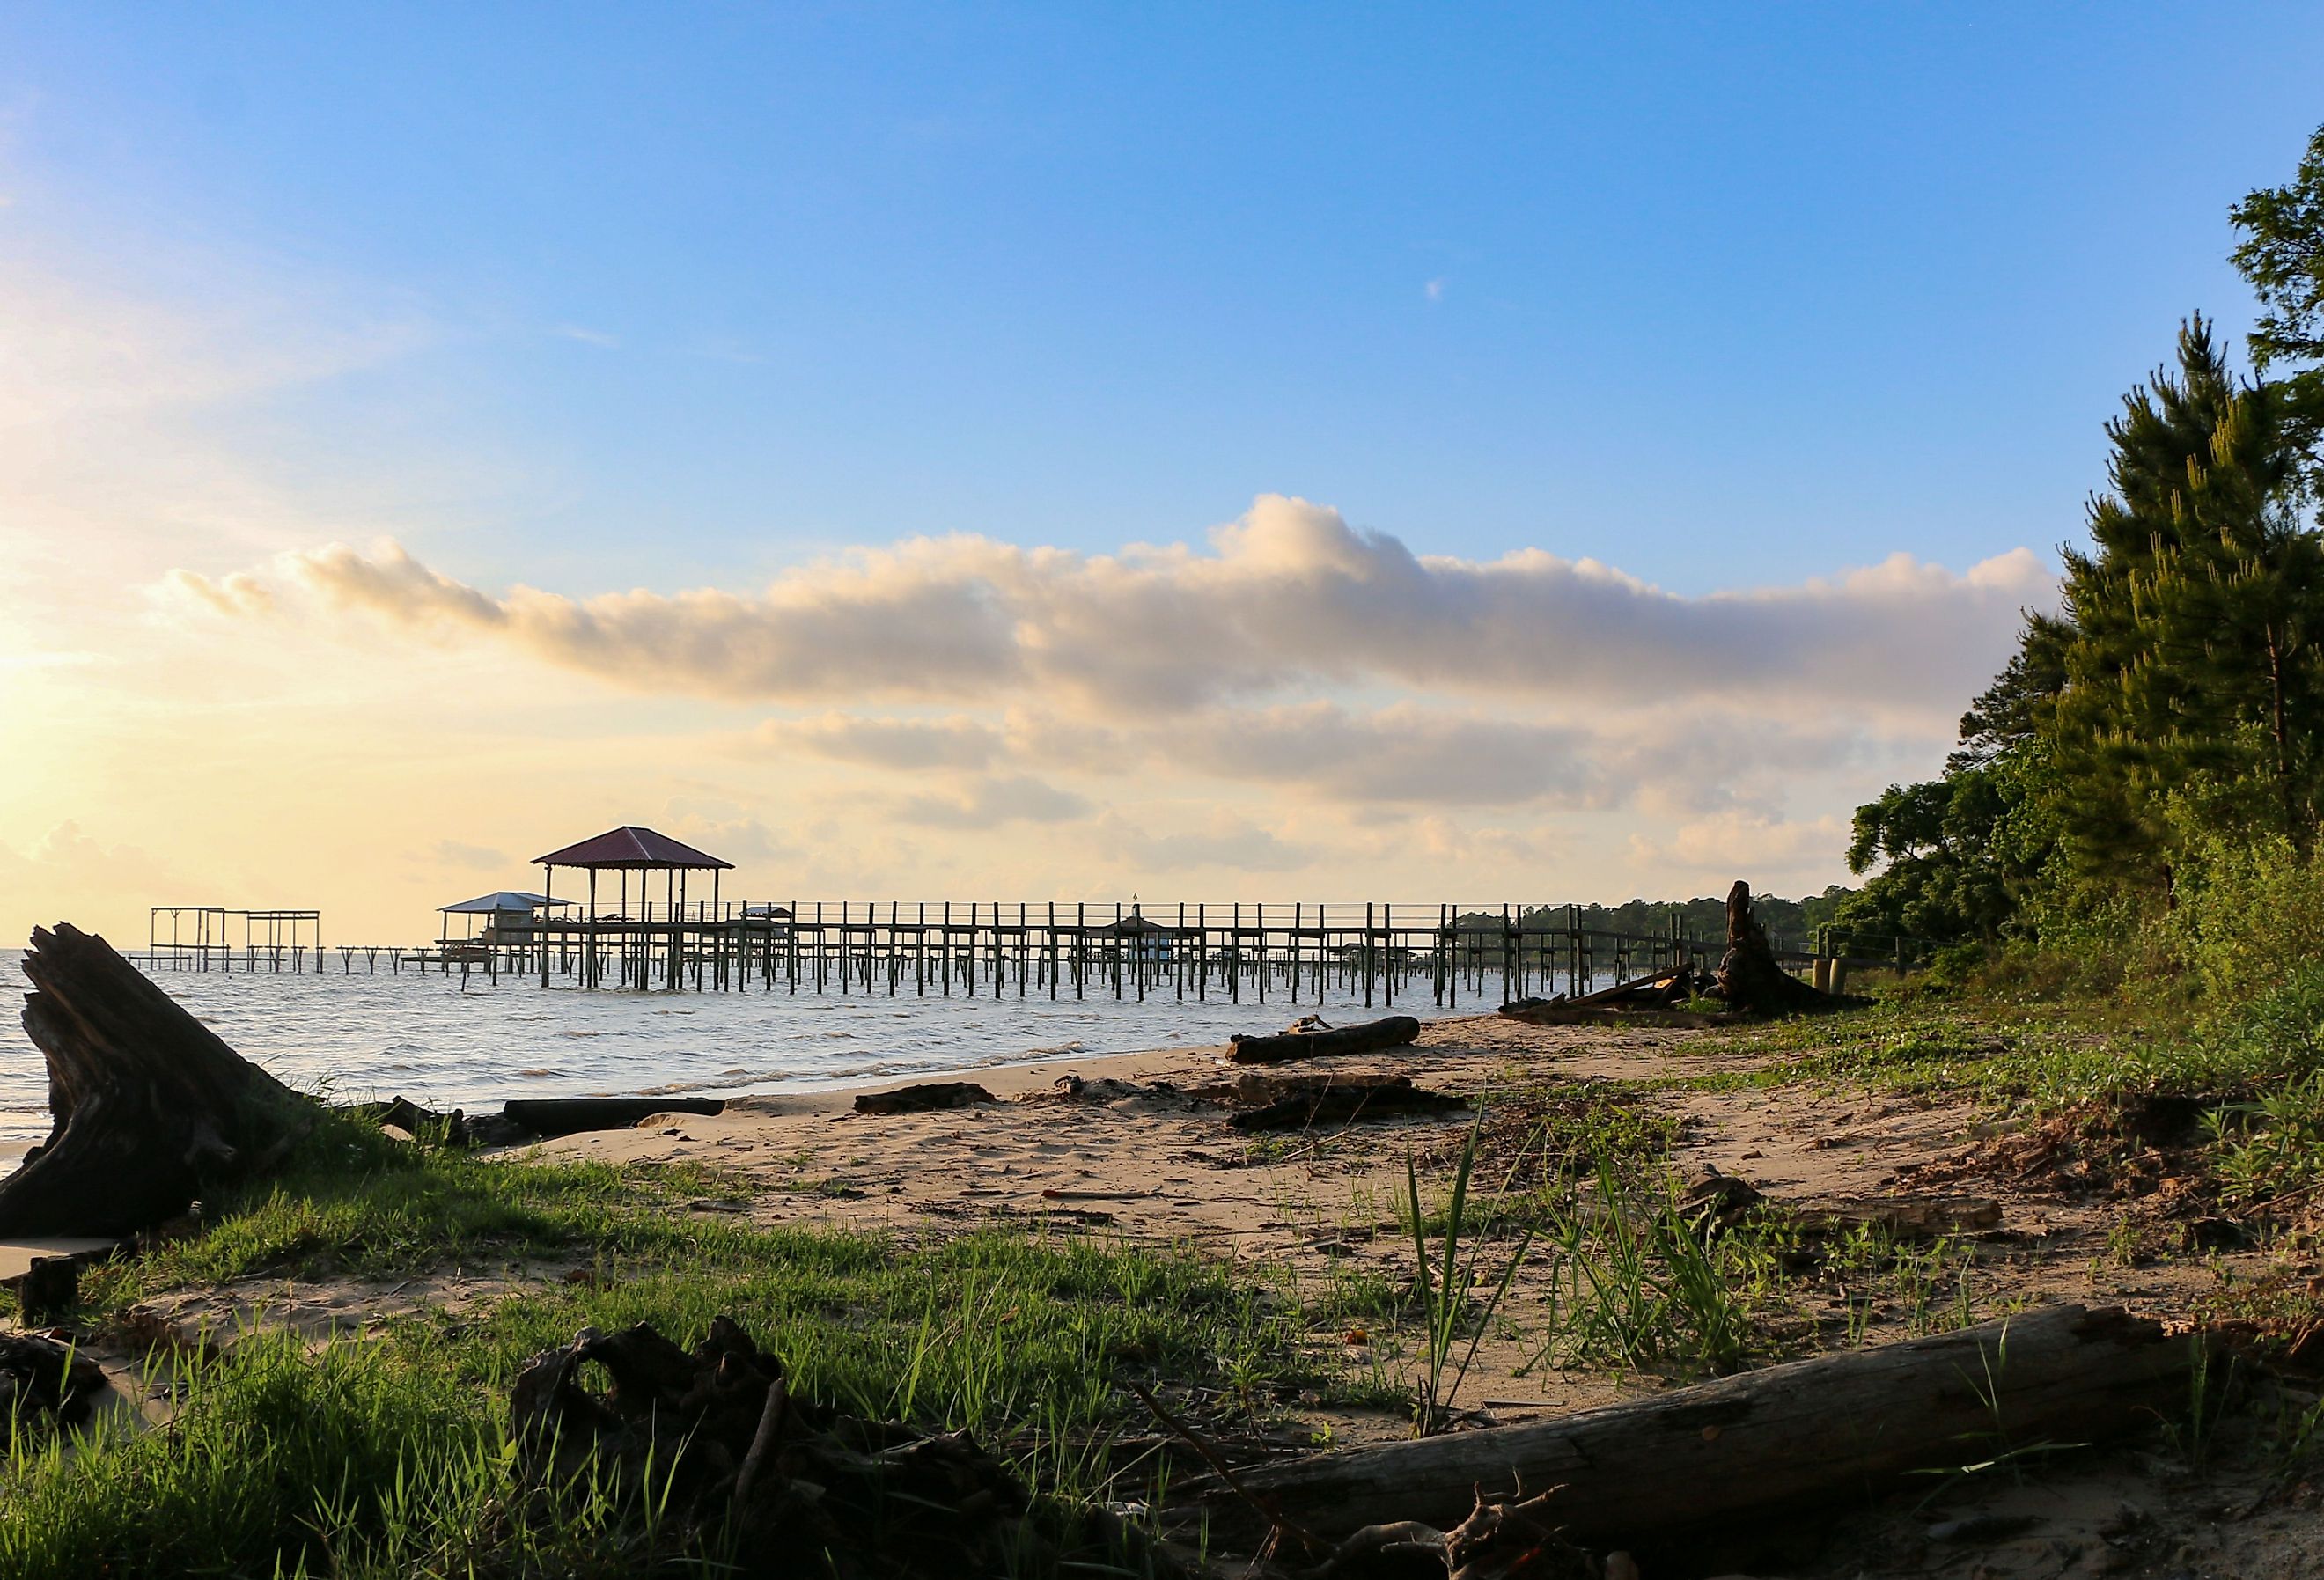 Mobile Bay shoreline Fairhope, Alabama at late afternoon with pier in background